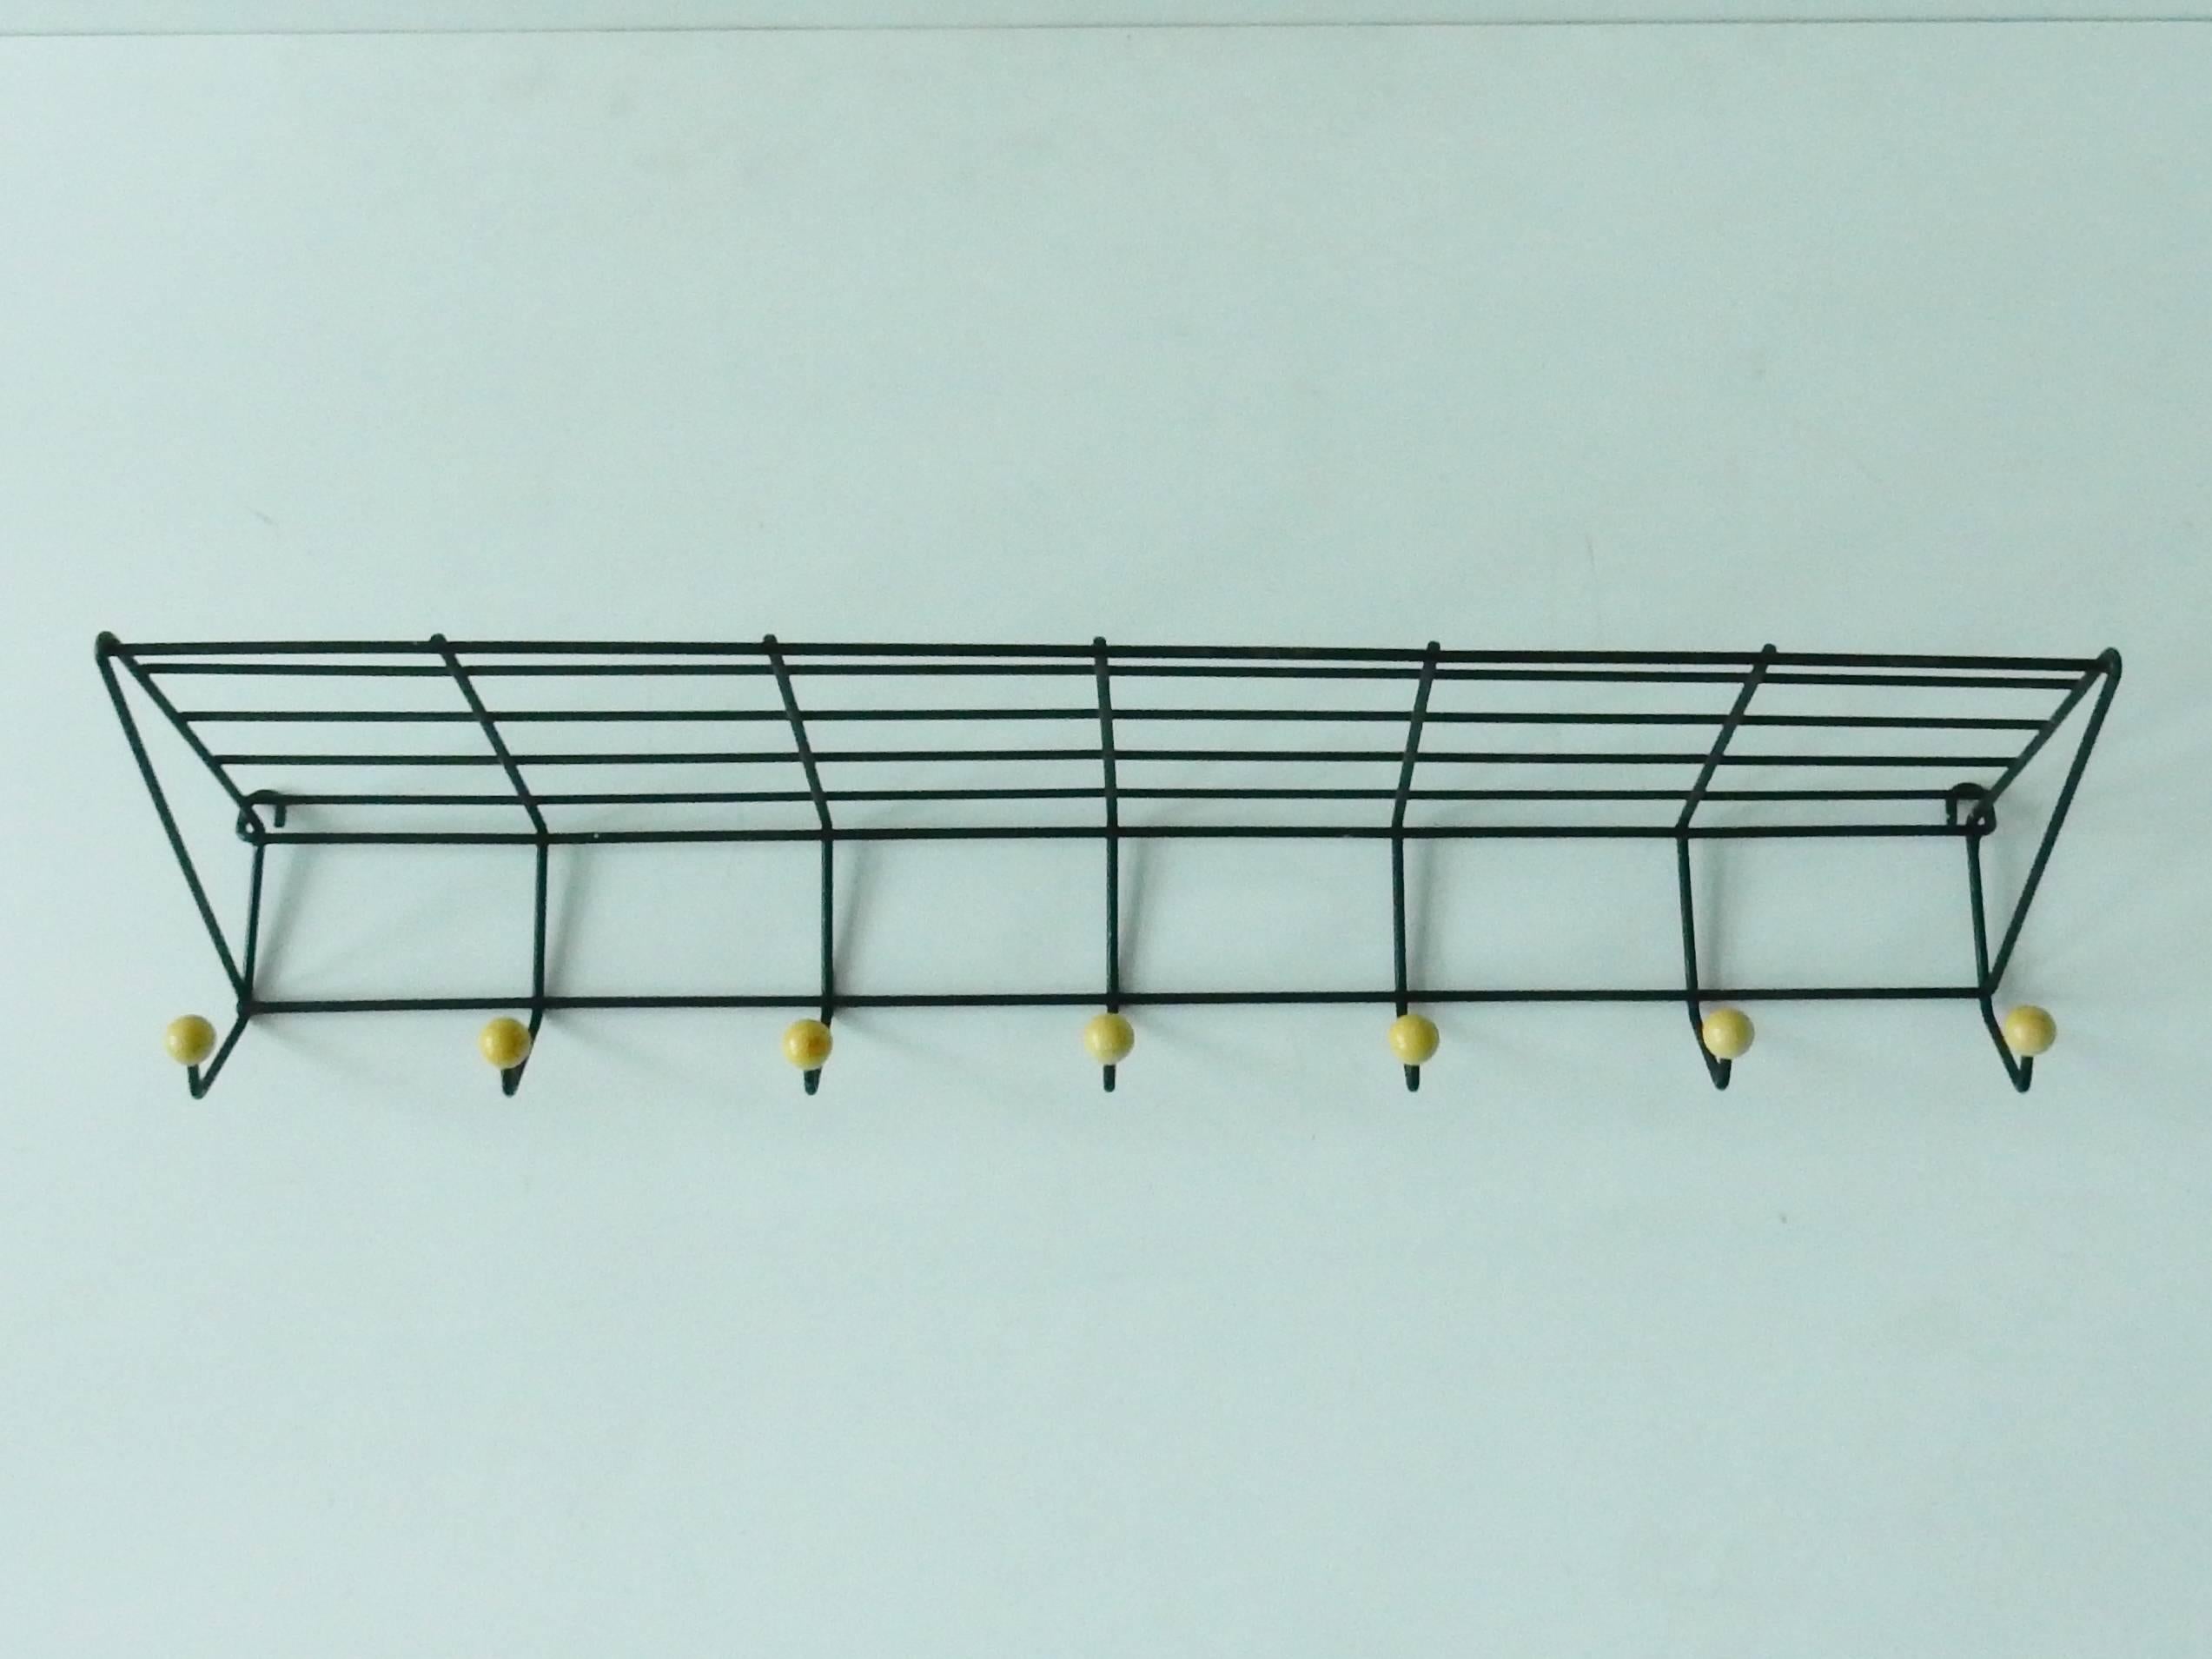 A design by Friso Kramer from 1956 for the company, 't Spectrum. This coat rack is made from black lacquered rod steel. An Industrial Design that is a great example of Dutch design from this era.
This version with seven hooks is the largest version